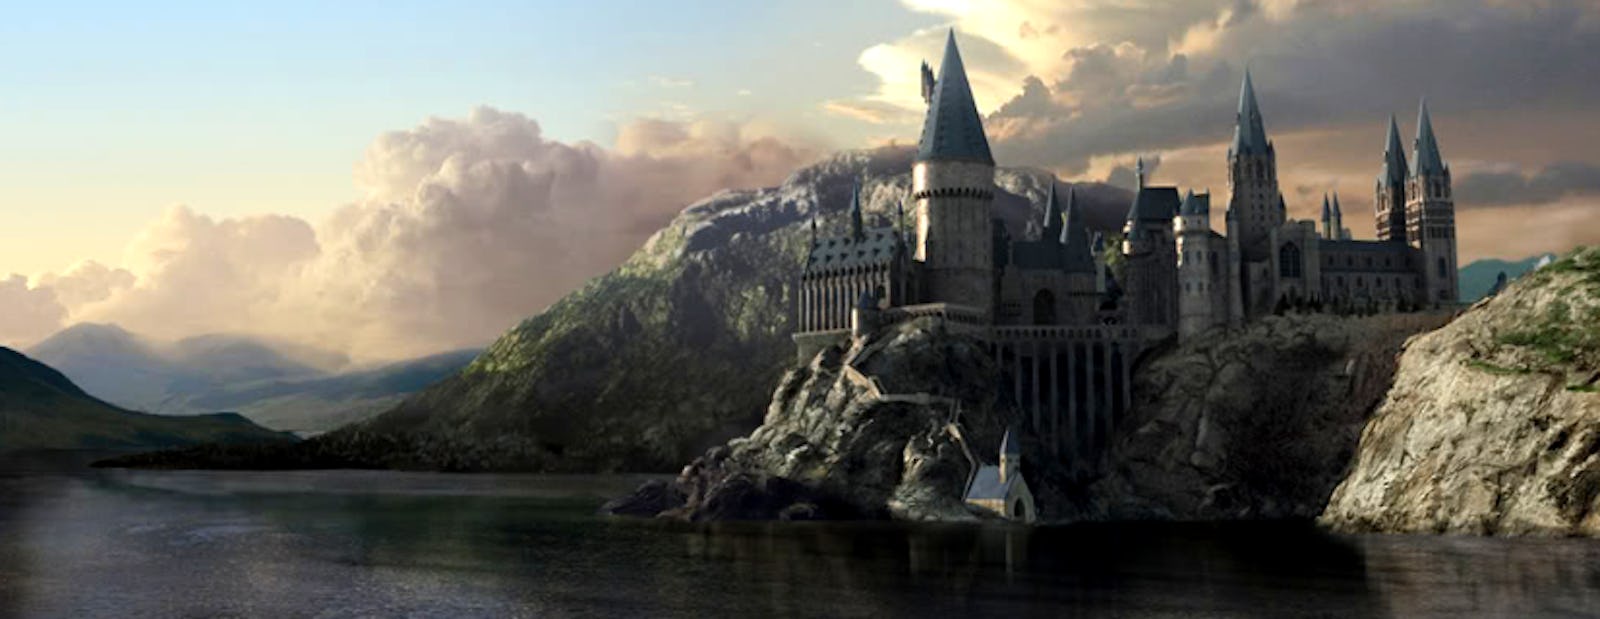 fictional place to visit